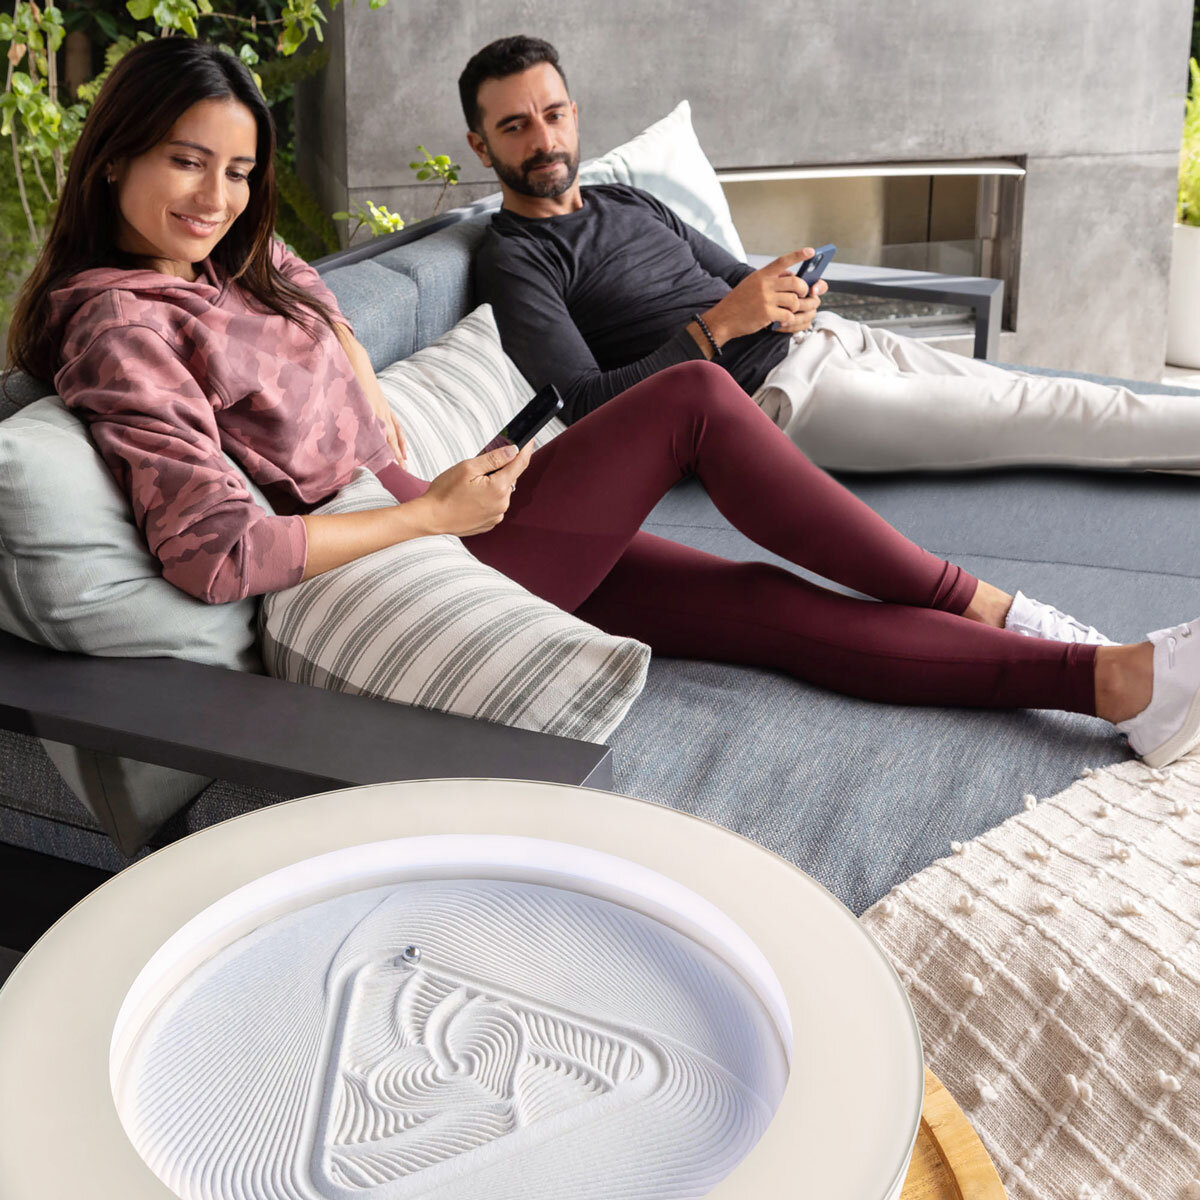 Lifestyle Image of the Homedics Drift Sandscape table next to a couple reclining